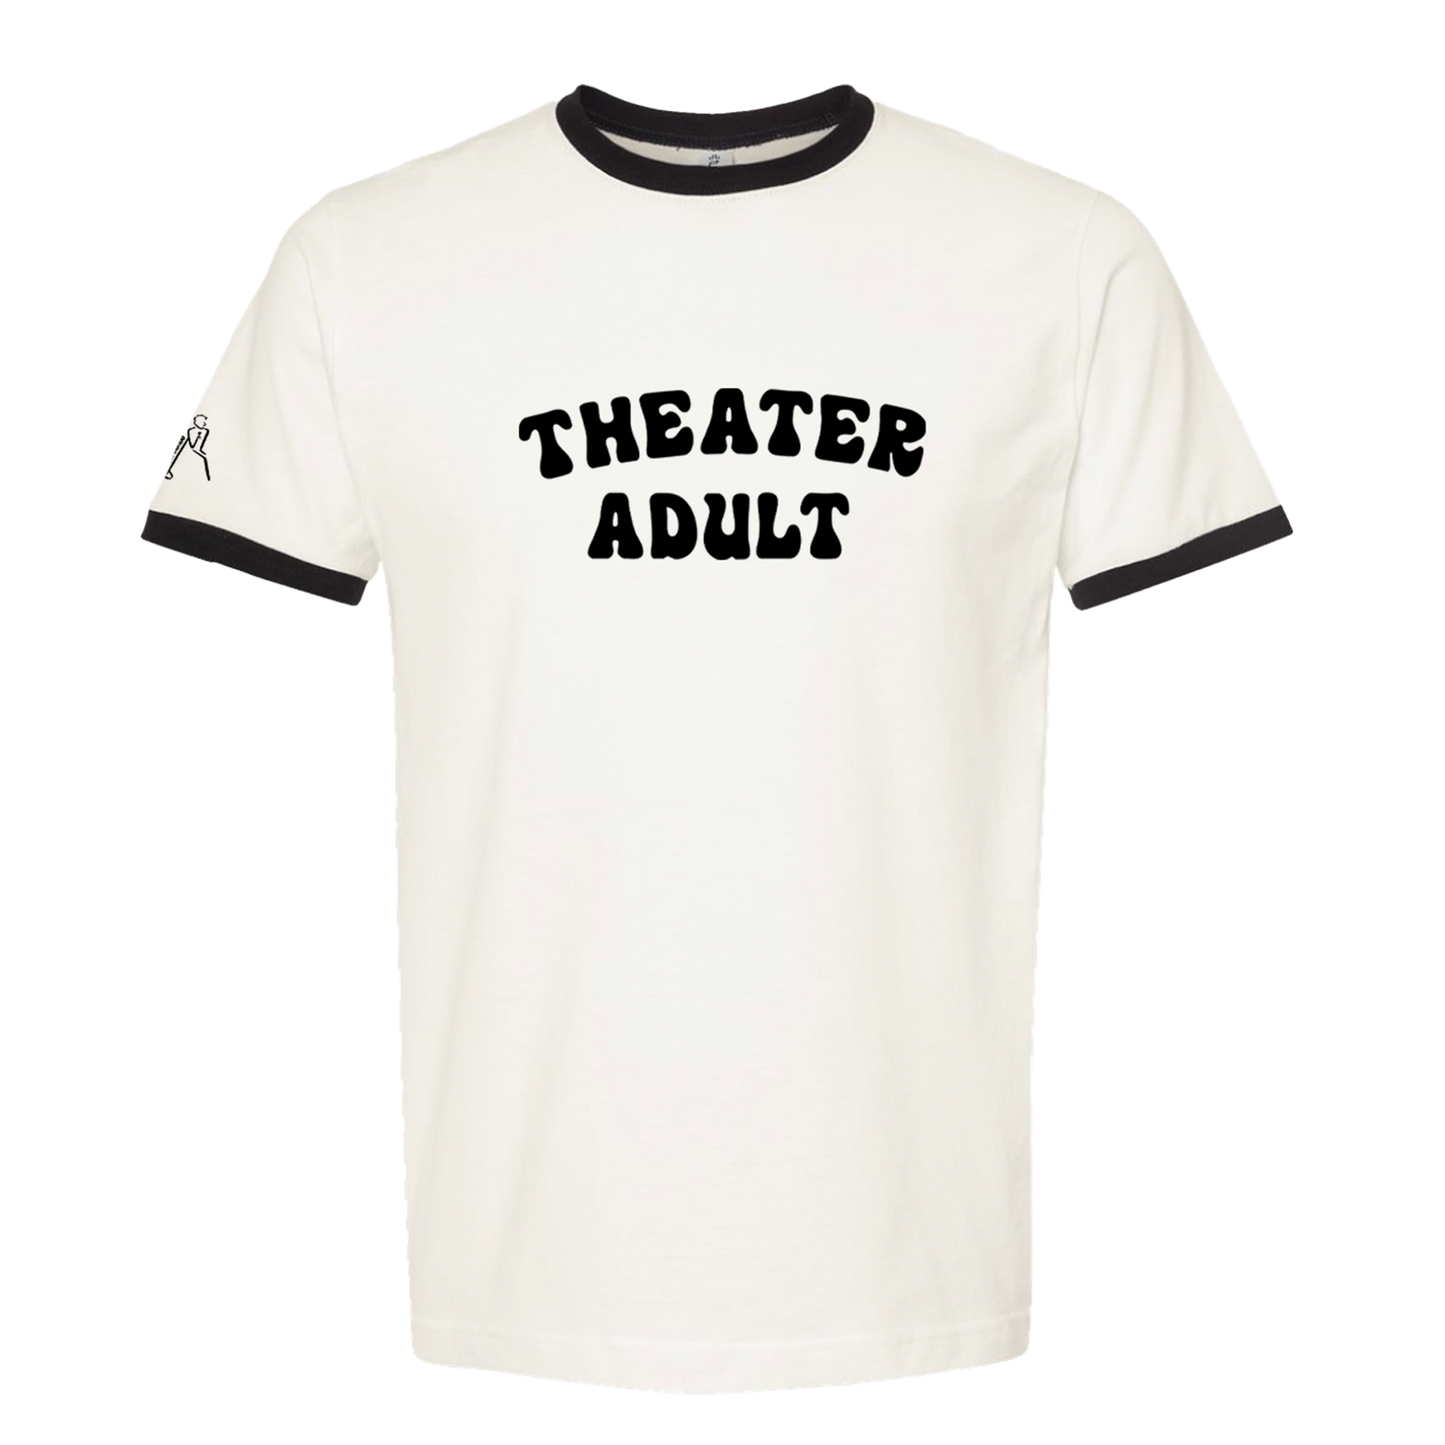 Theater Adult Tee - White